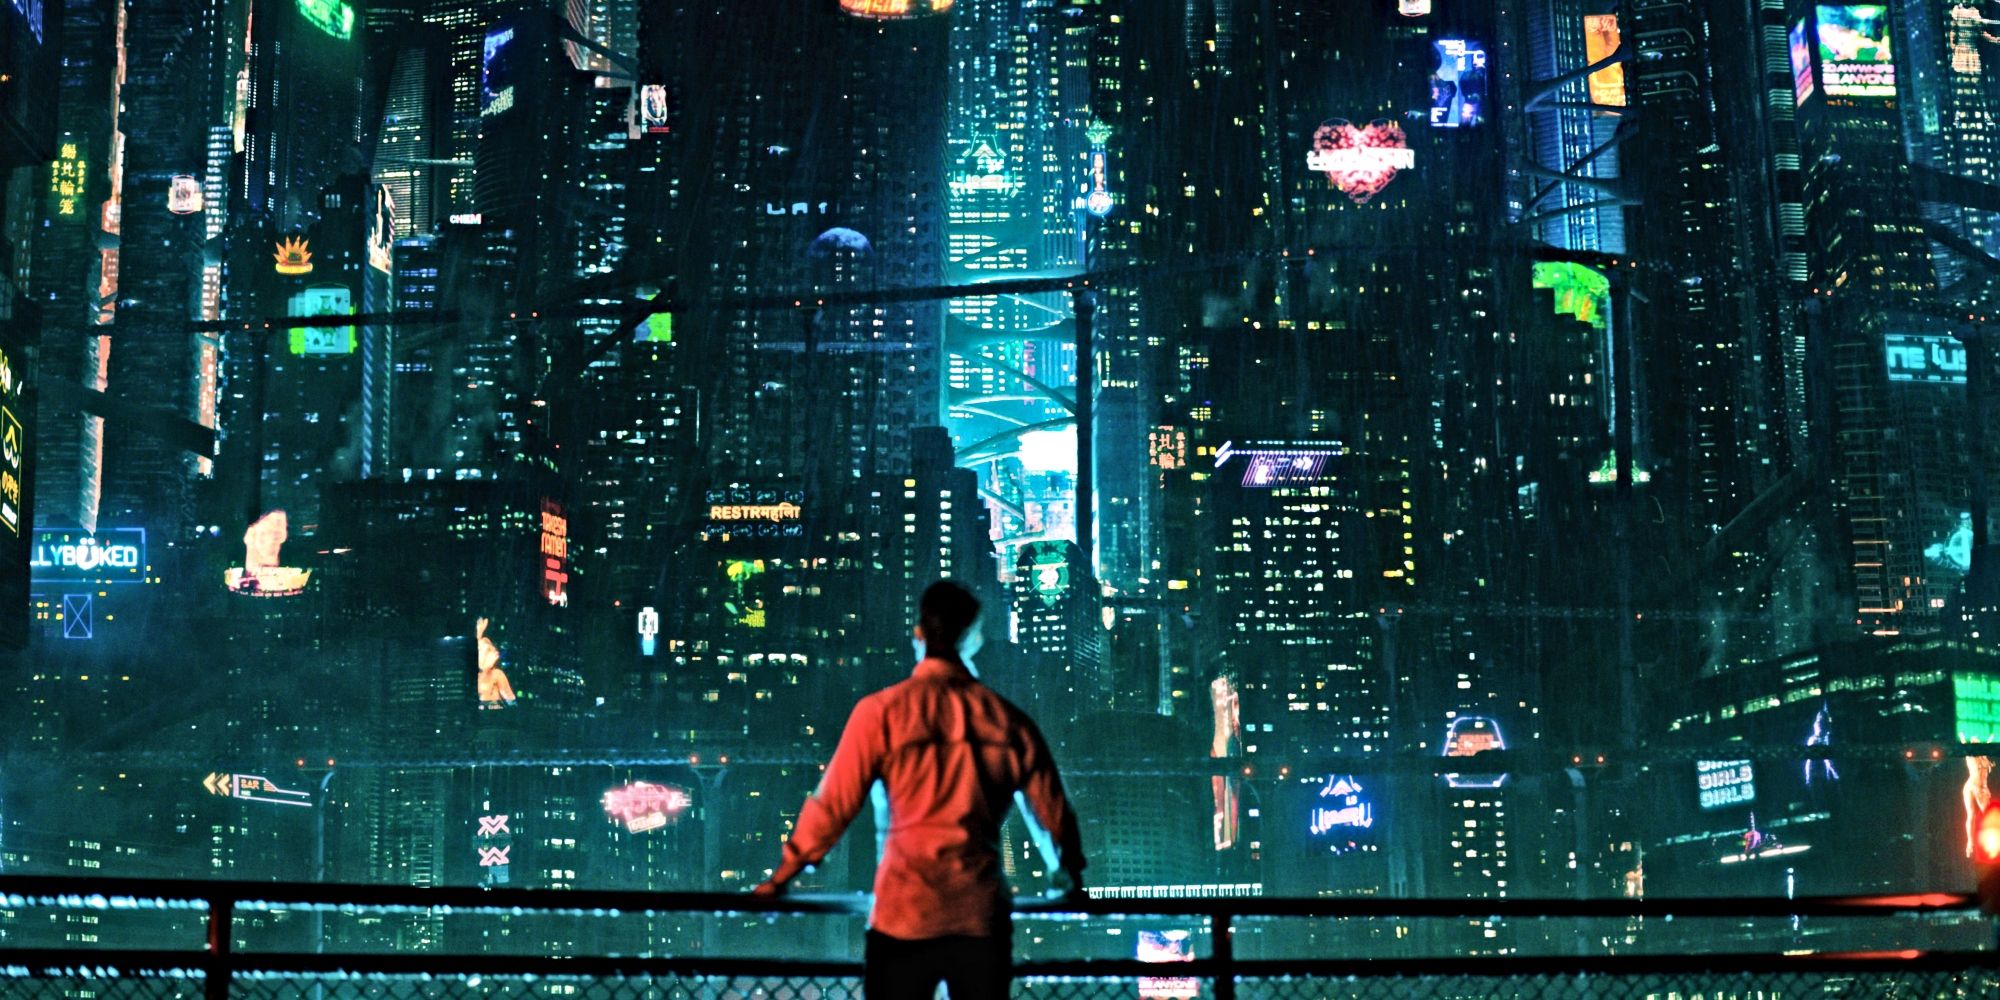 Image of a man standing in front of a futuristic city scape